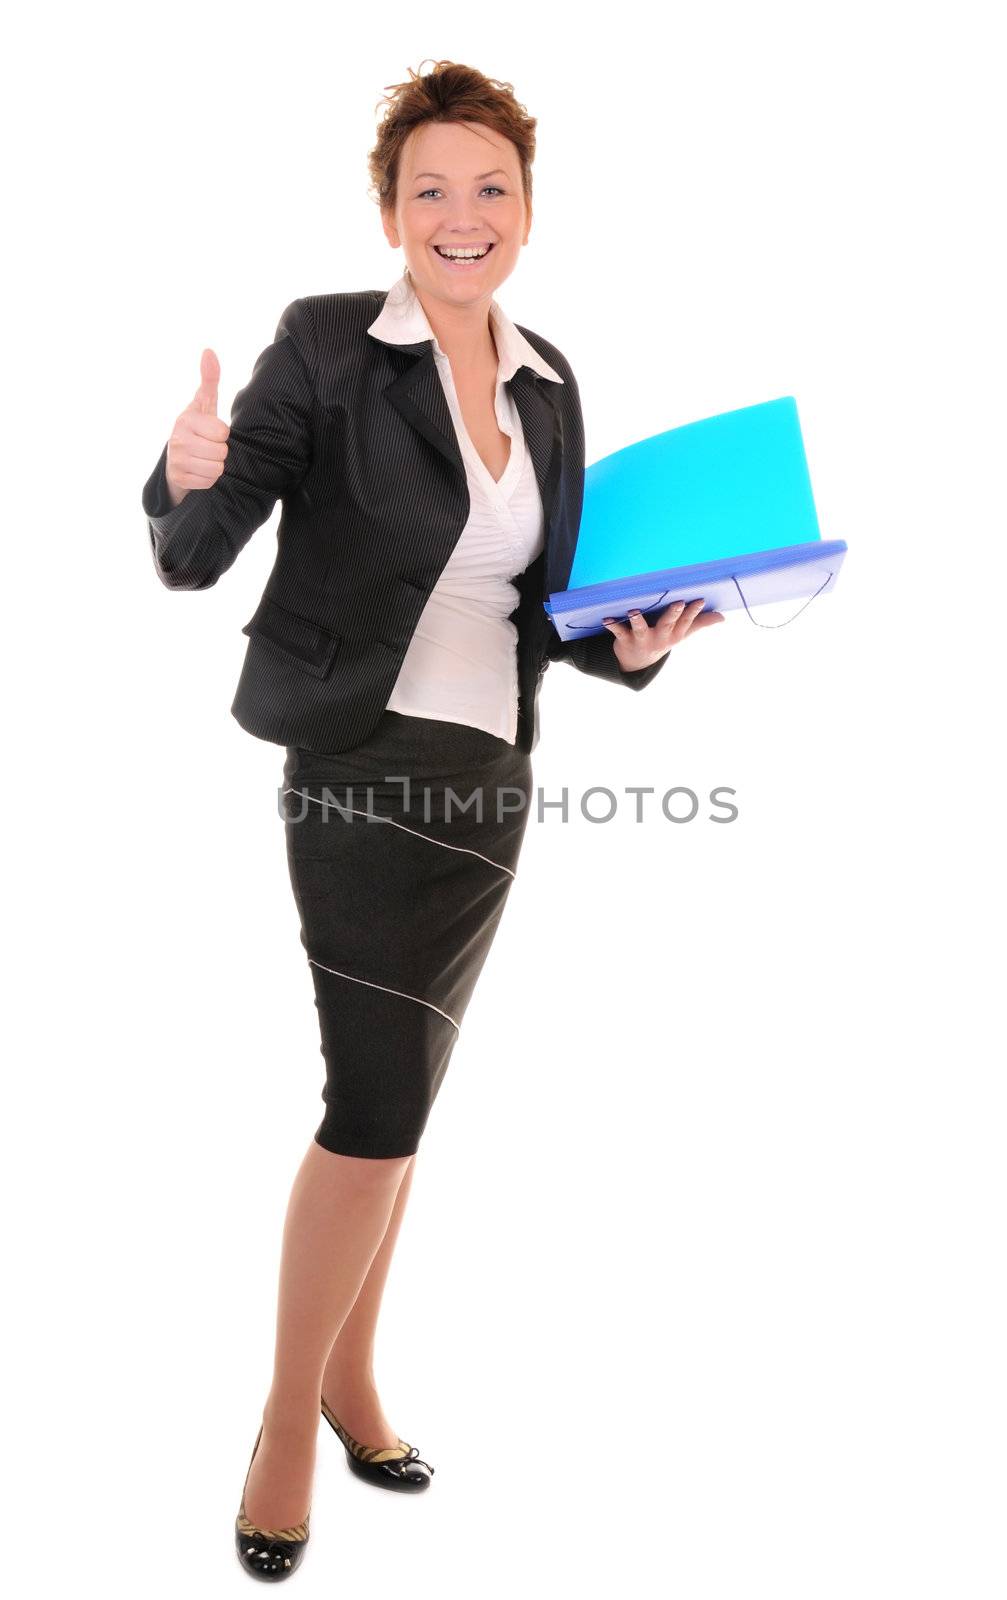 Atractive business woman with documents shows alright gesture on white background